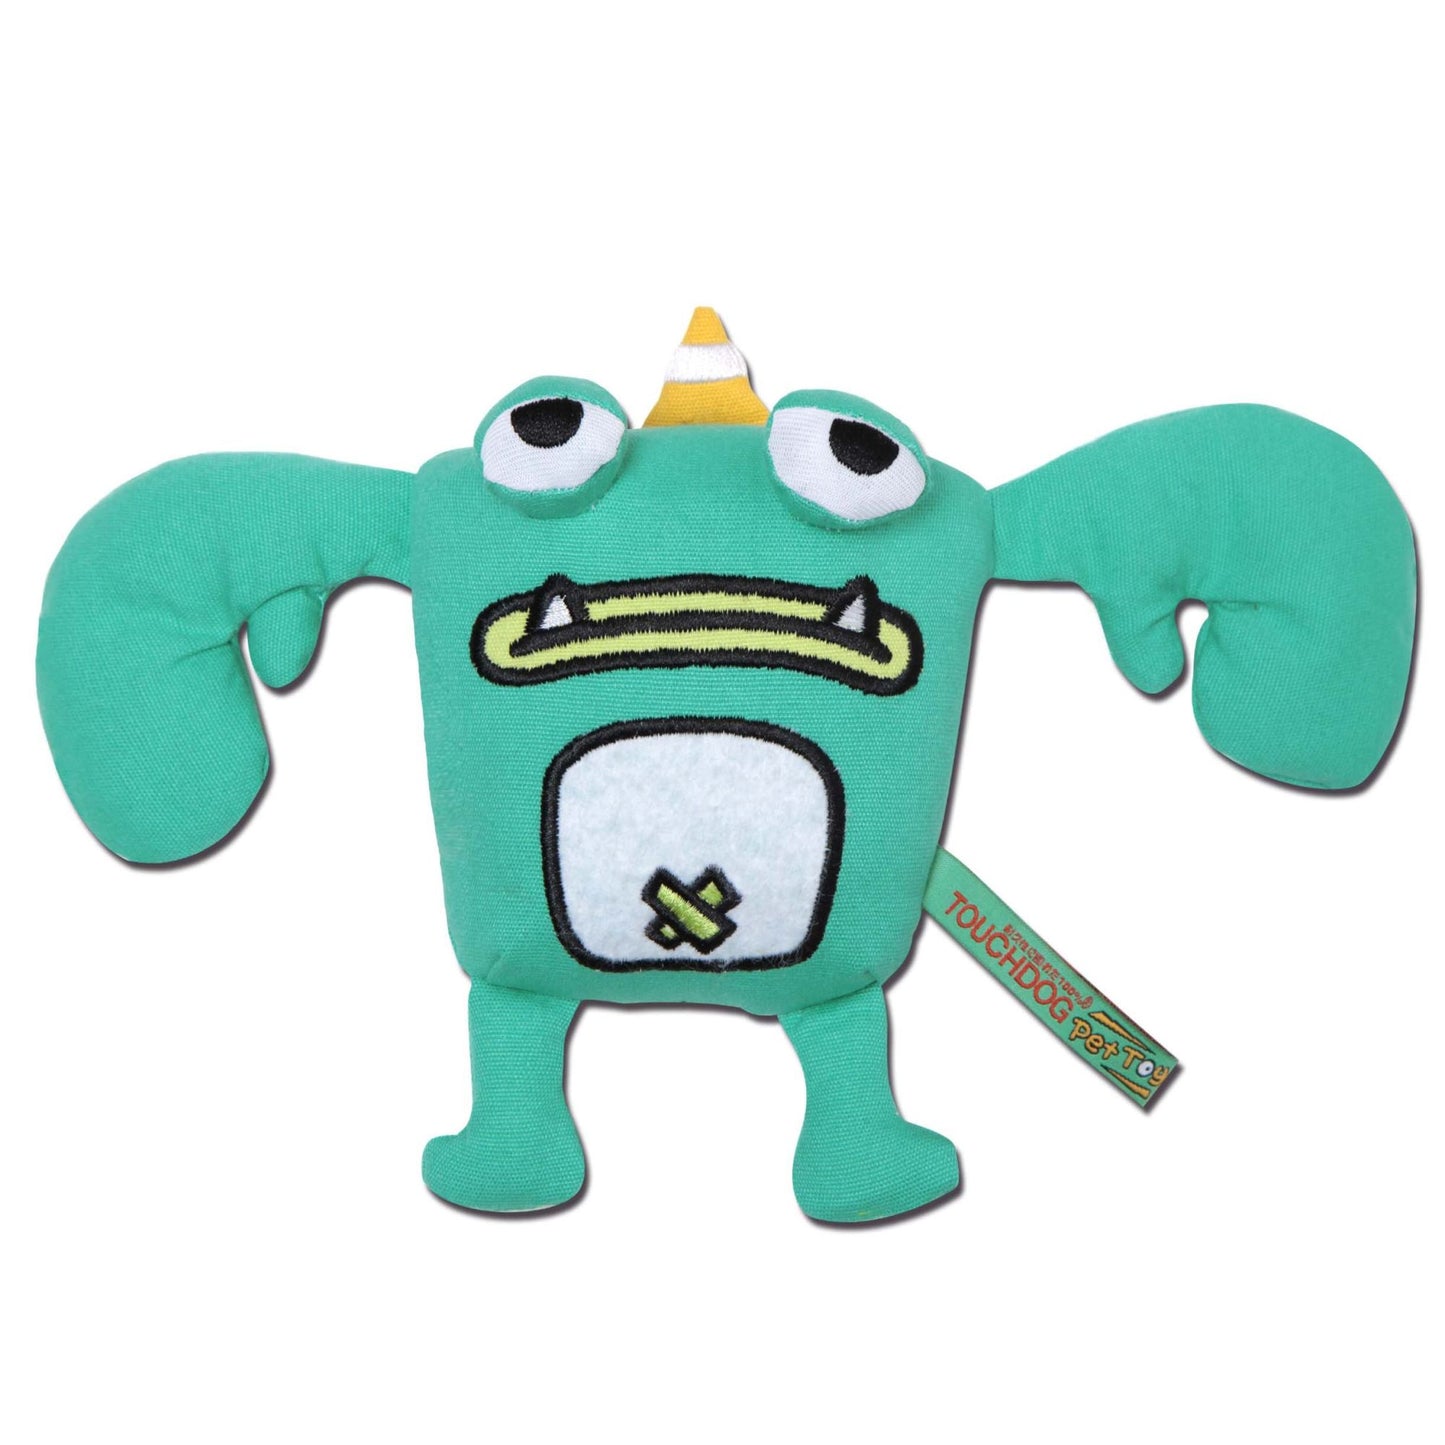 Crabby Tooth Monster Plush Toy